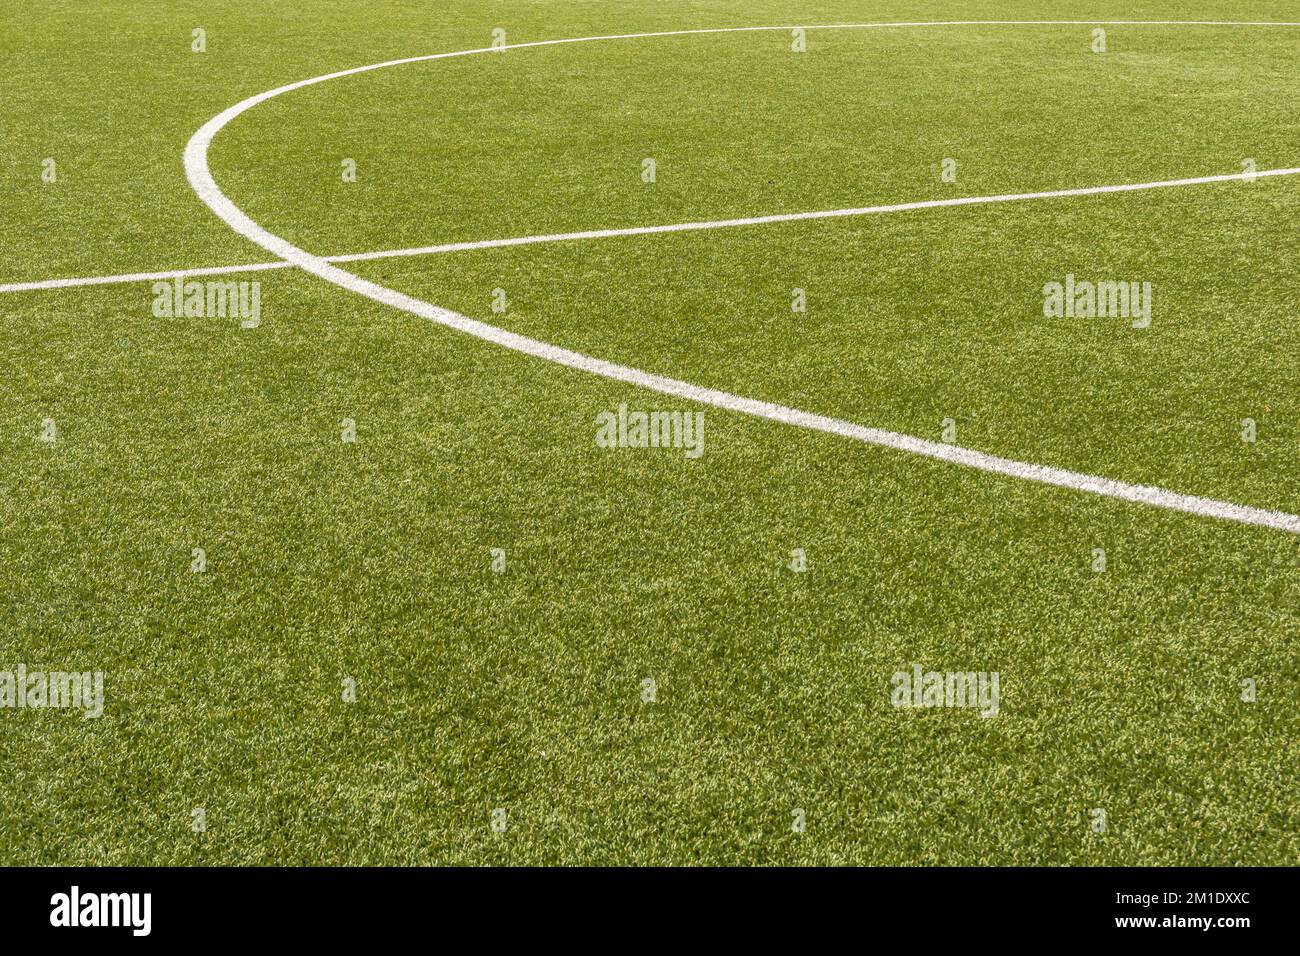 Center circle on a football field made of artificial turf as a background Stock Photo